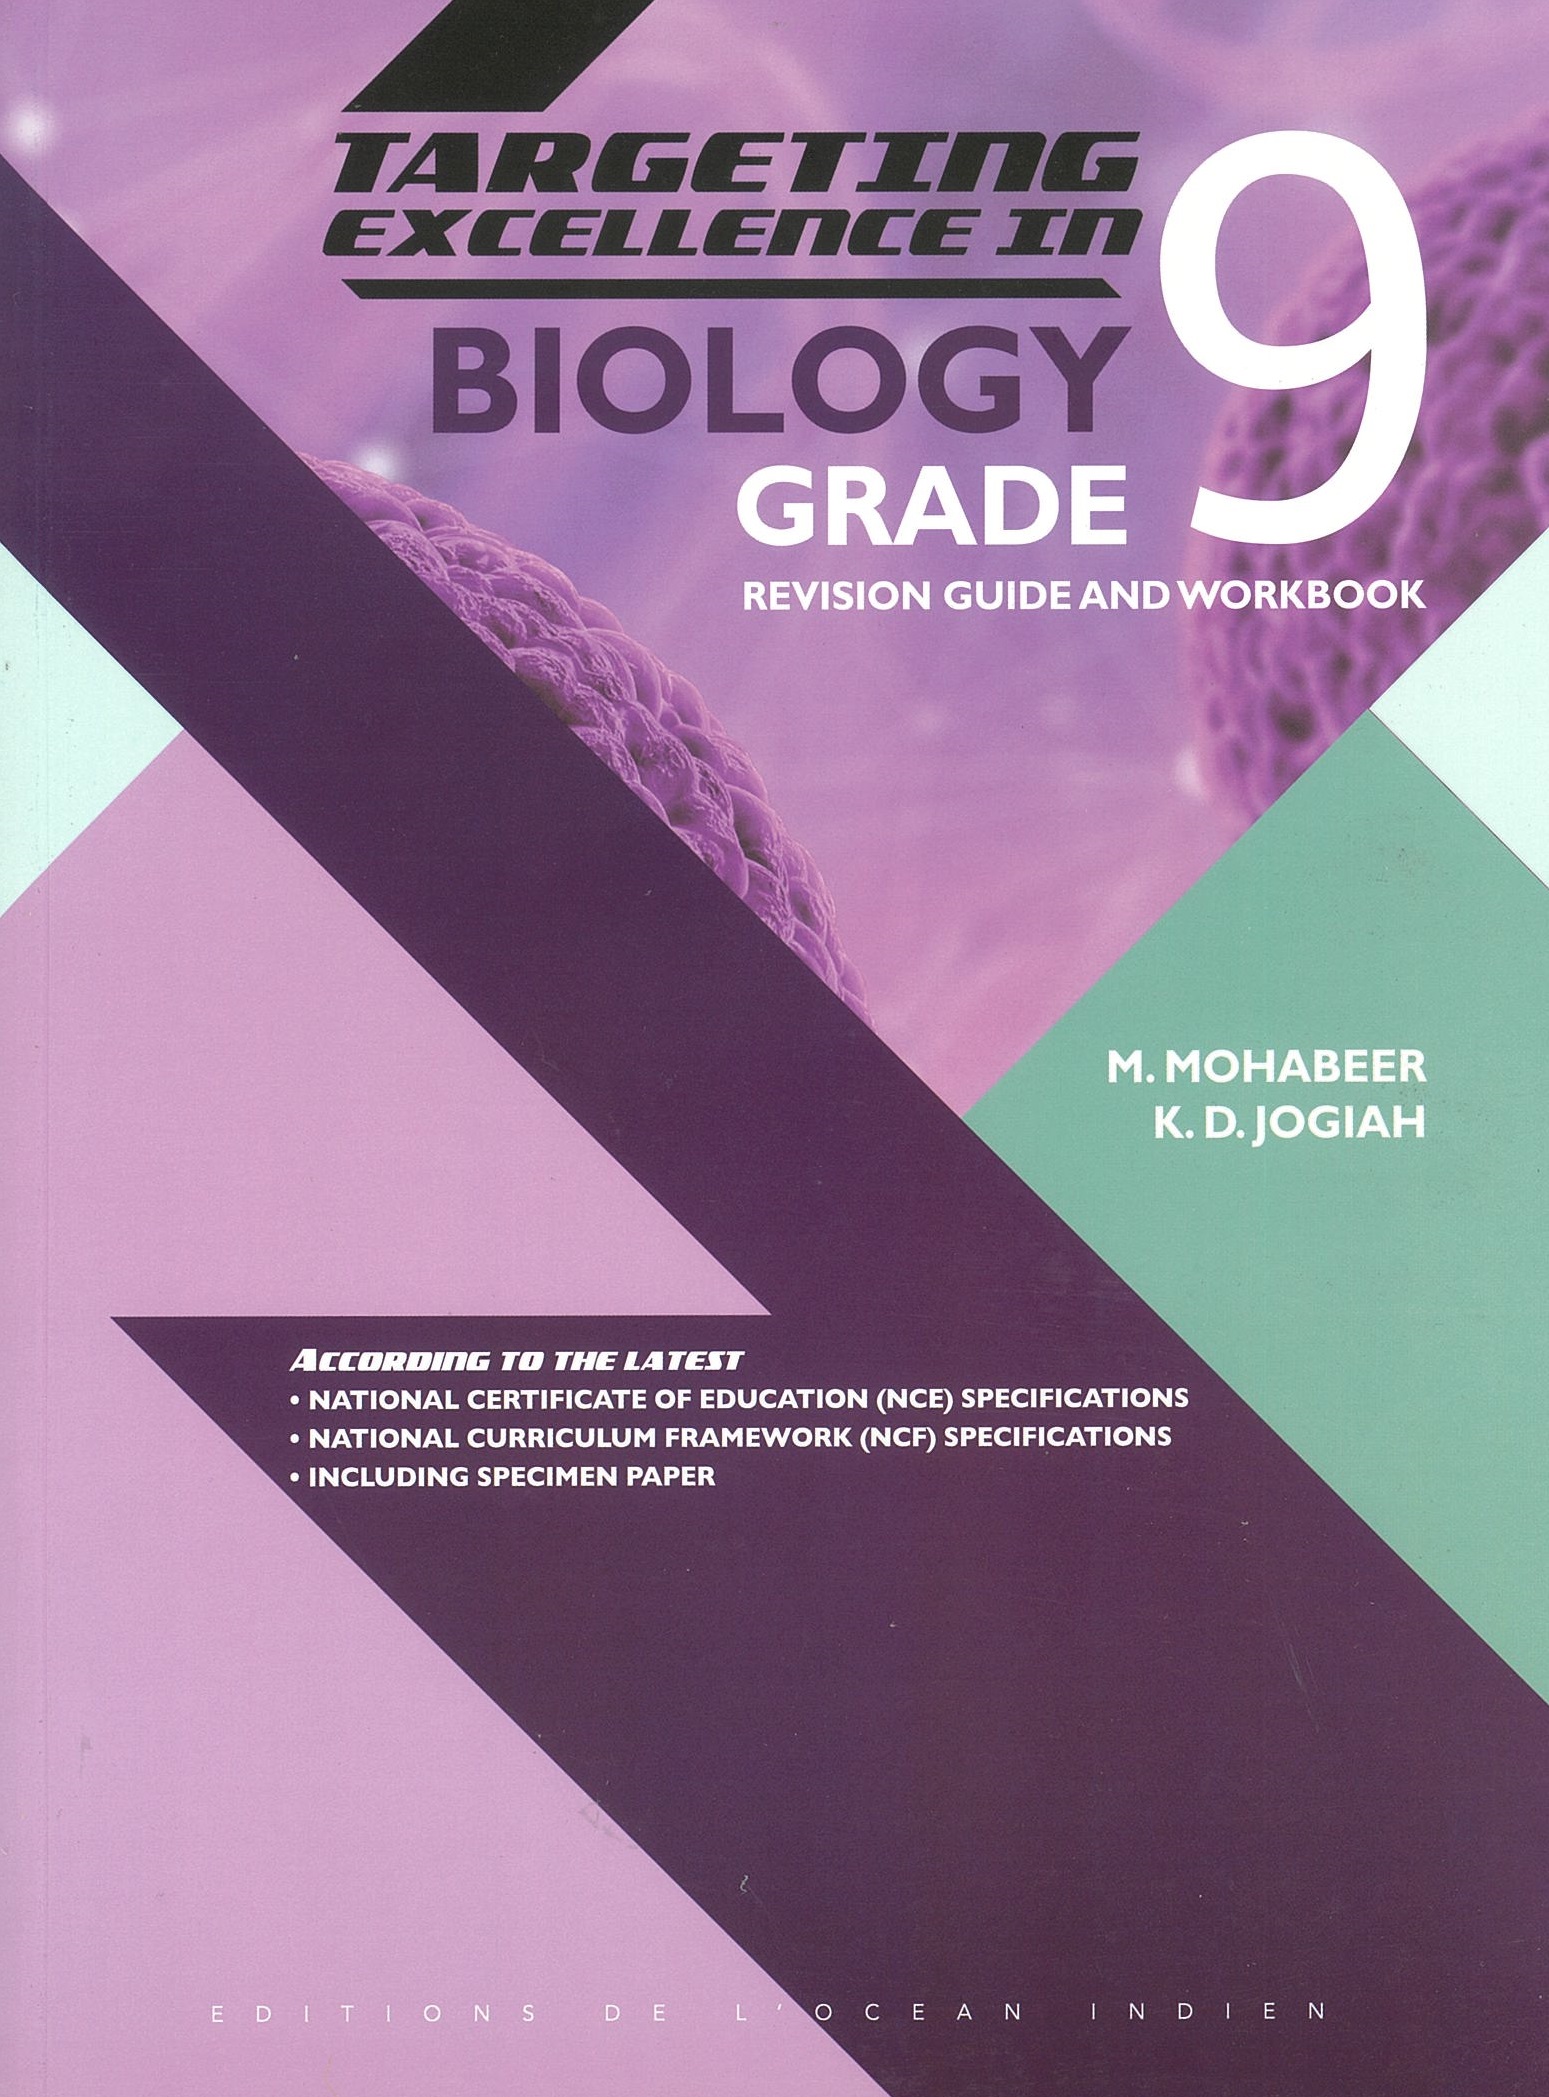 TARGETING EXCELLENCE IN BIOLOGY GRADE 9 â€“ MOHABEER & JOGIAH